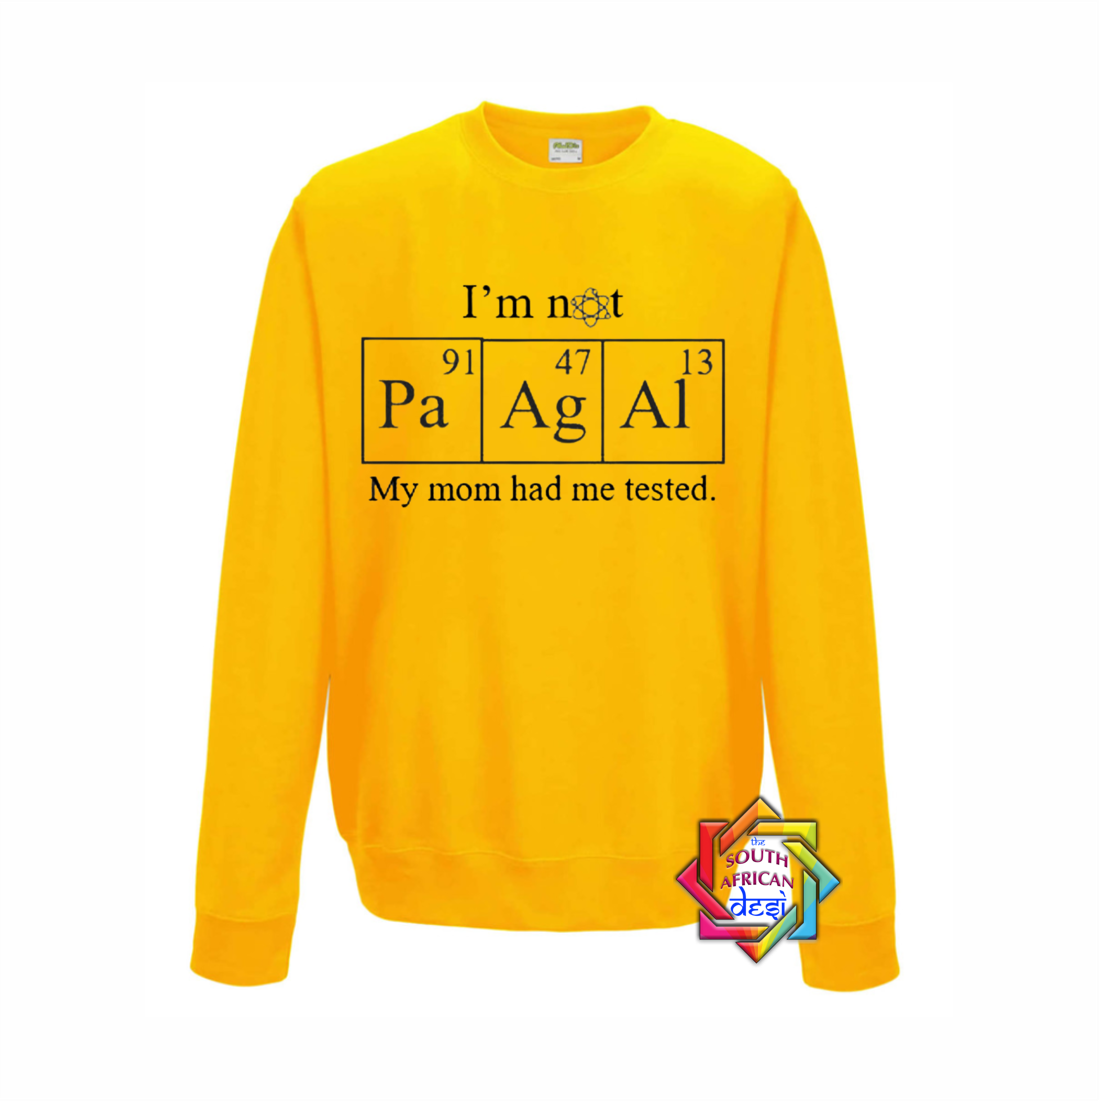 I'M NOT PAAGAL MY MOTHER HAD ME TESTED (BIG BANG THEORY INSPIRED) HOODIE/SWEATER | UNISEX